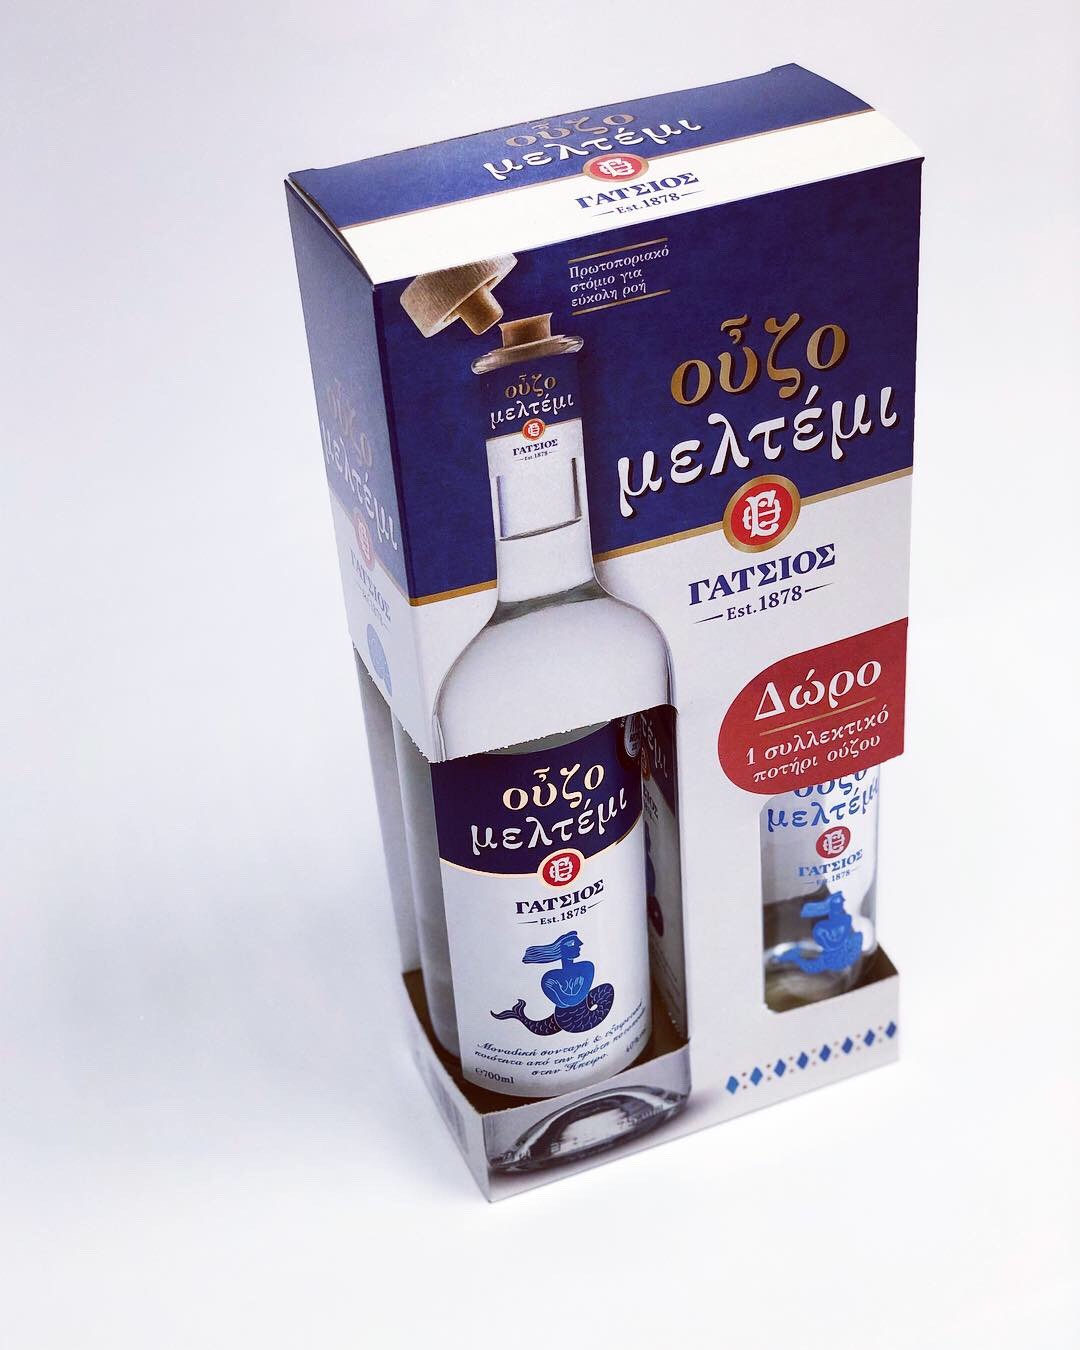 Gatsios Distillery Ouzo Meltemi Gift Pack (different angle)